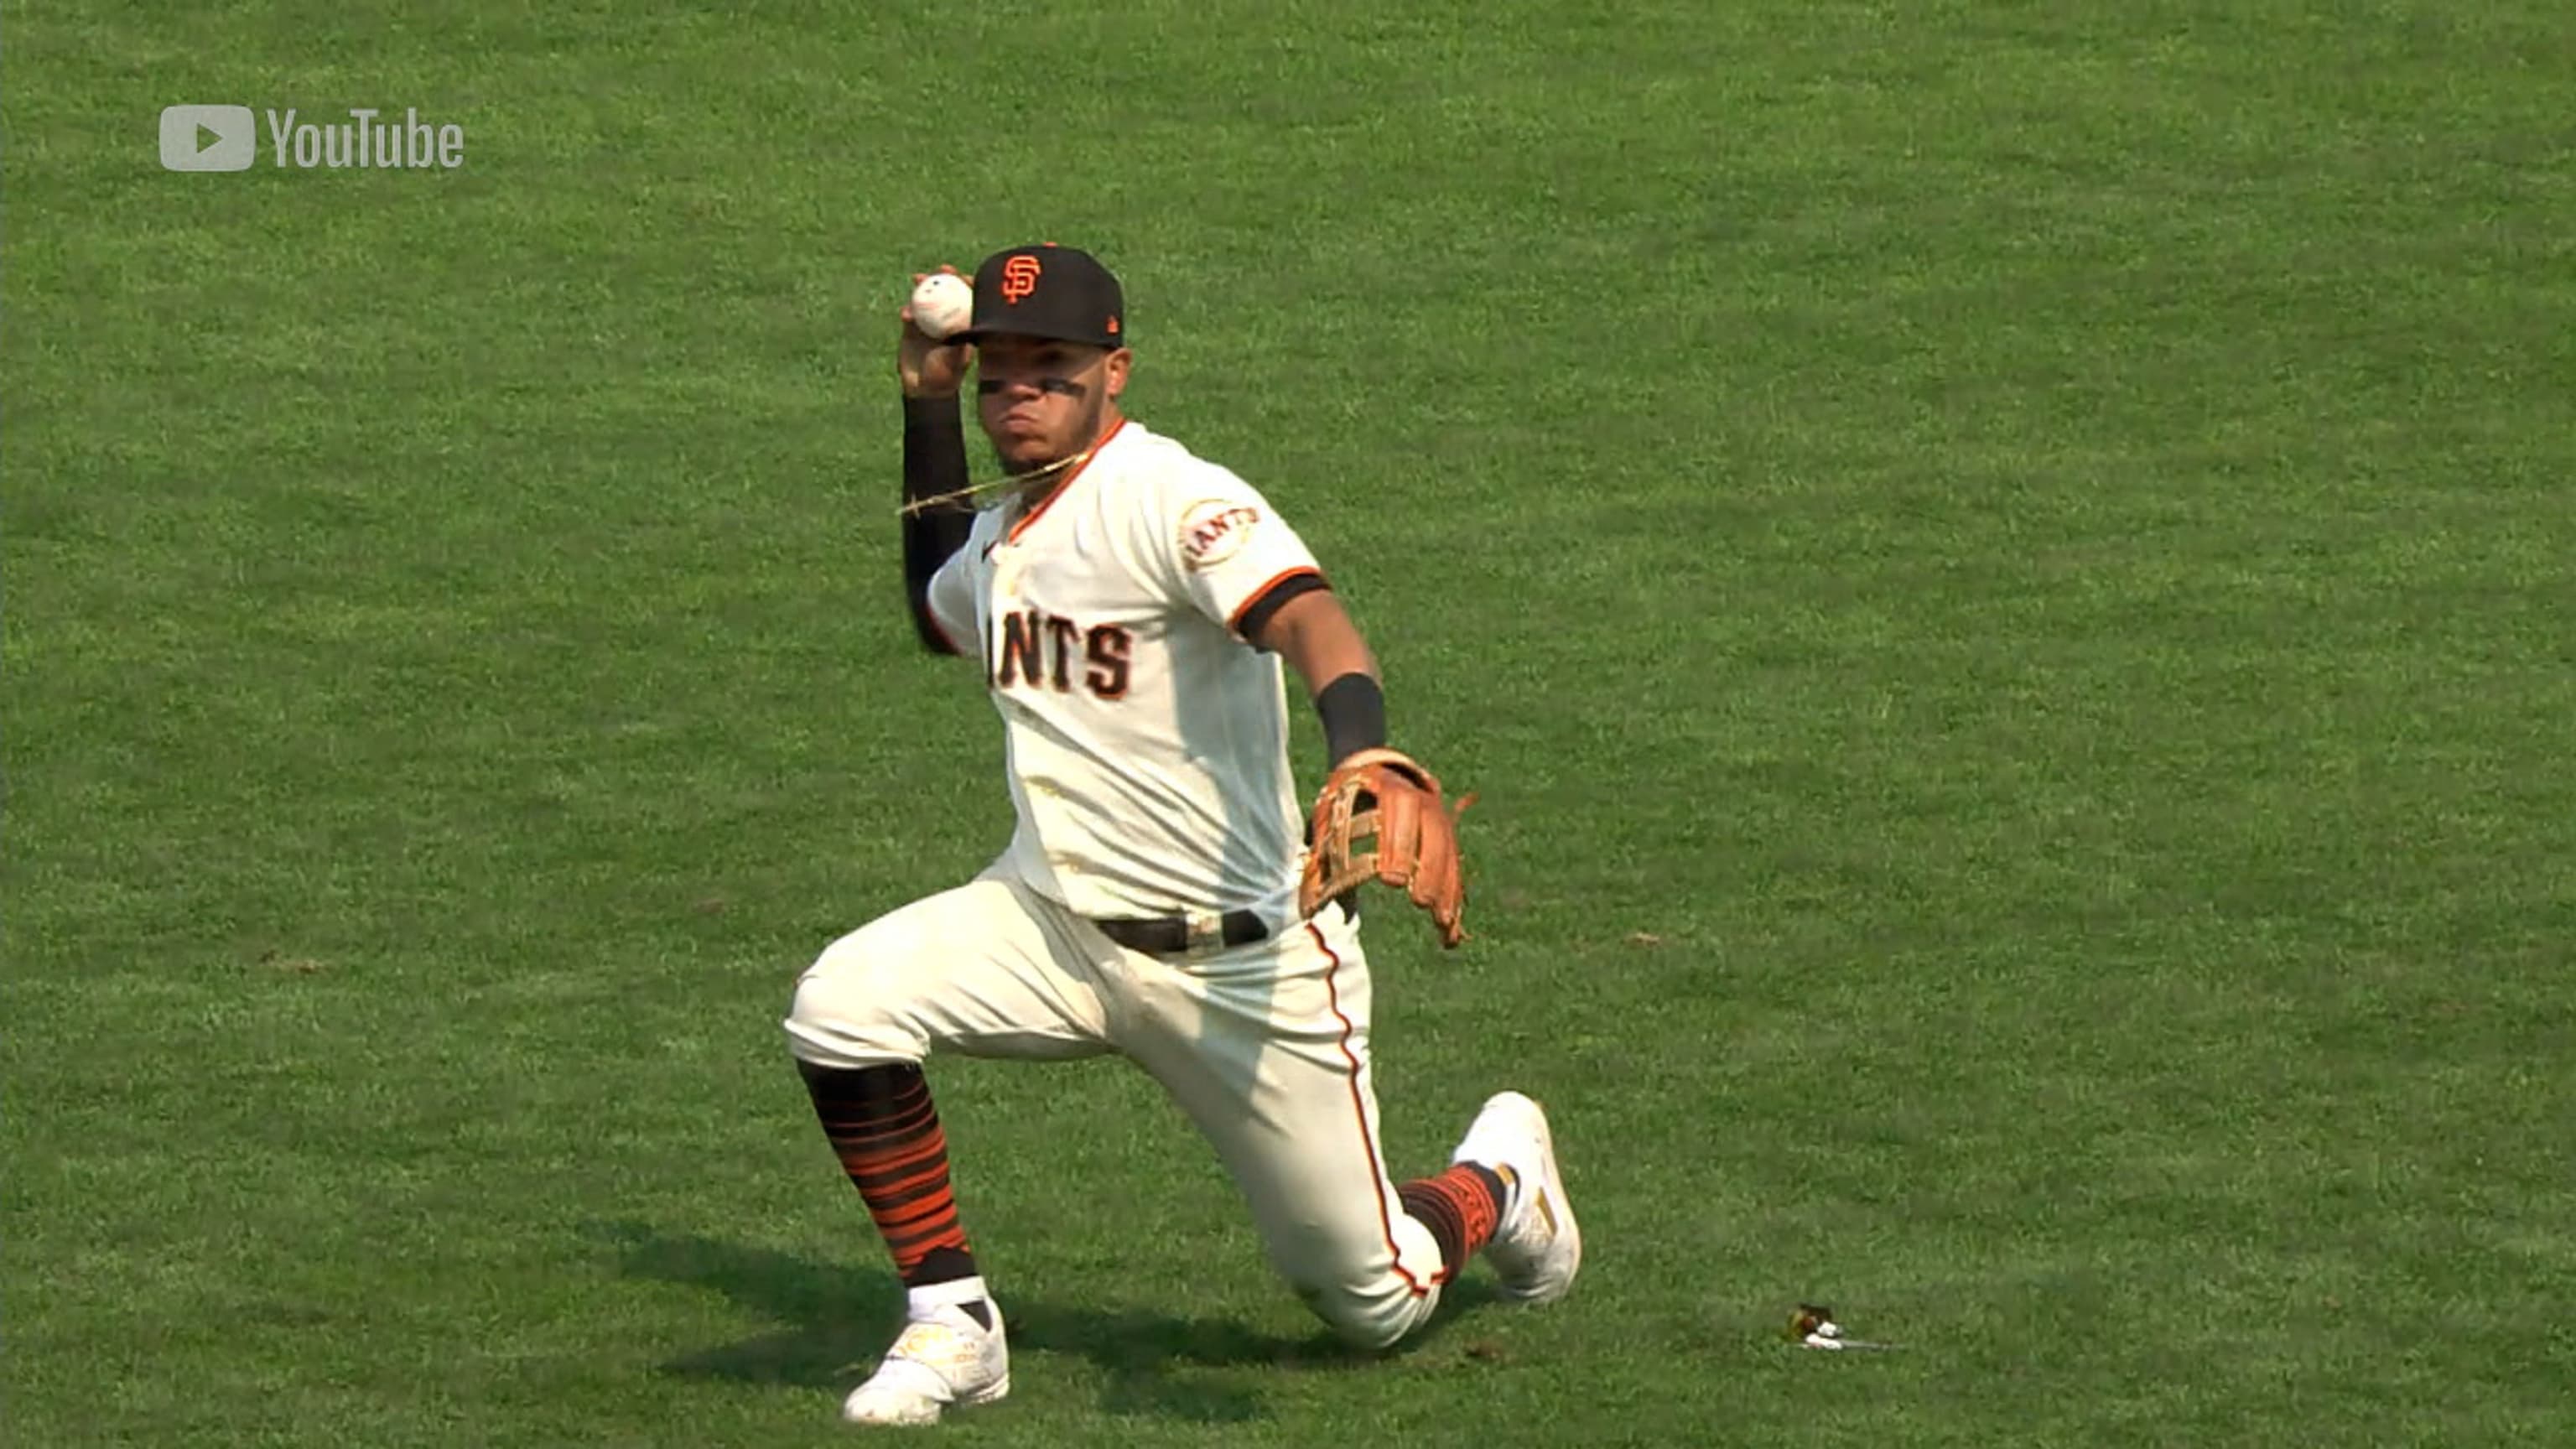 Giants beat Brewers 4-2